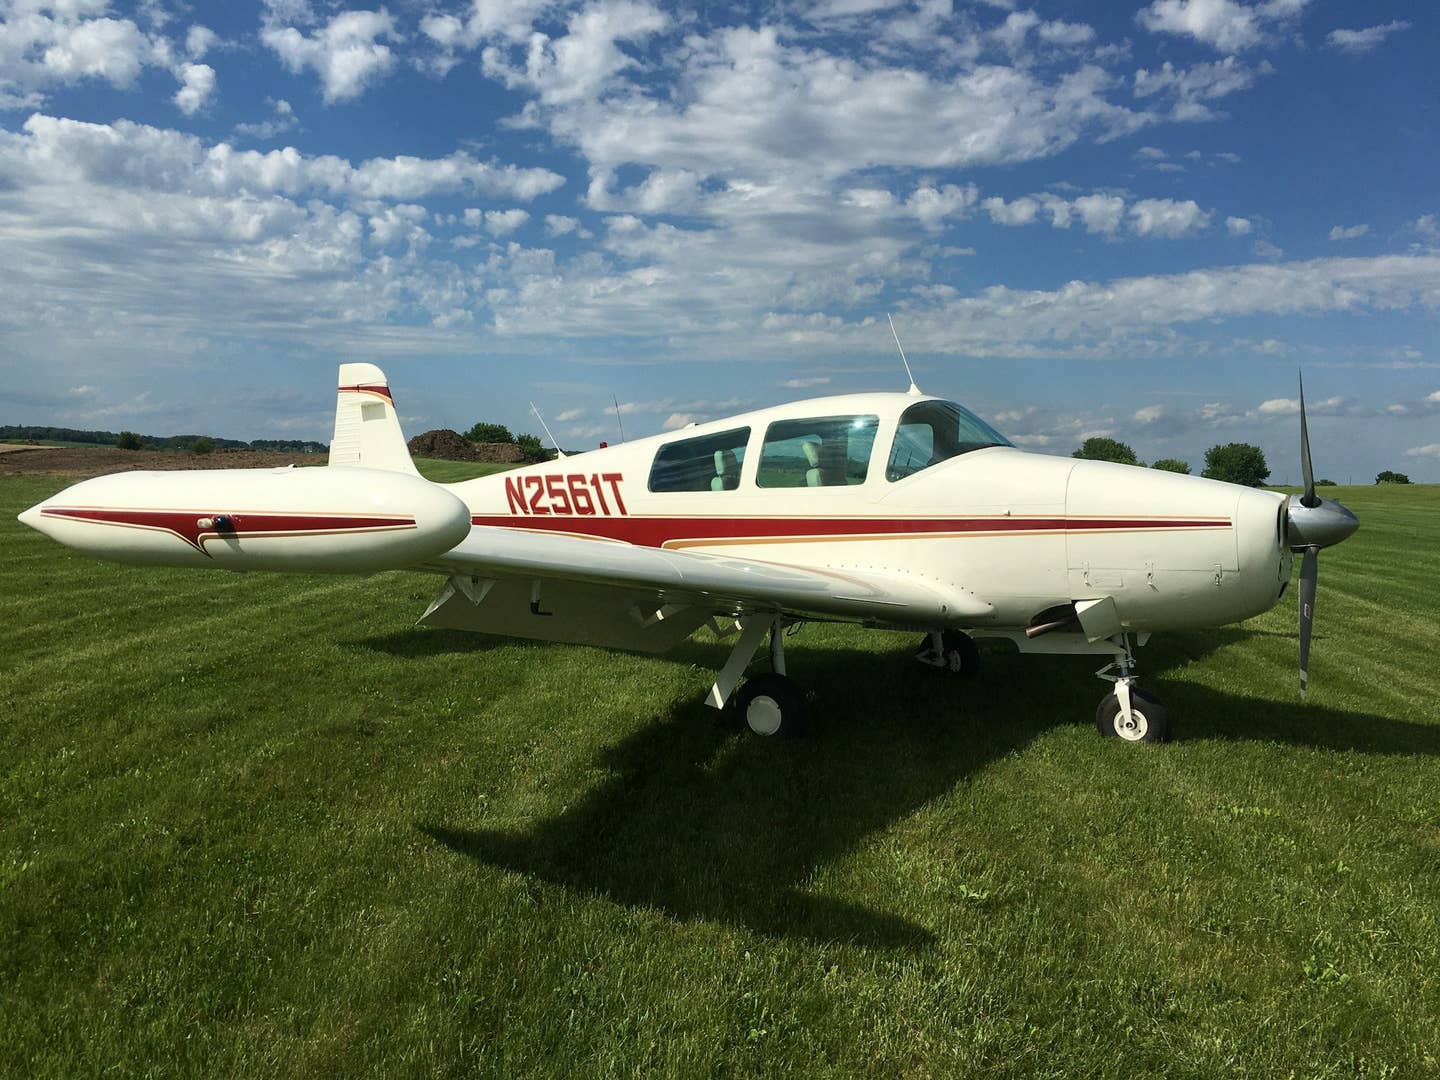 This 1976 North American Navion Is a Handsome Postwar ‘AircraftForSale’ Top Pick